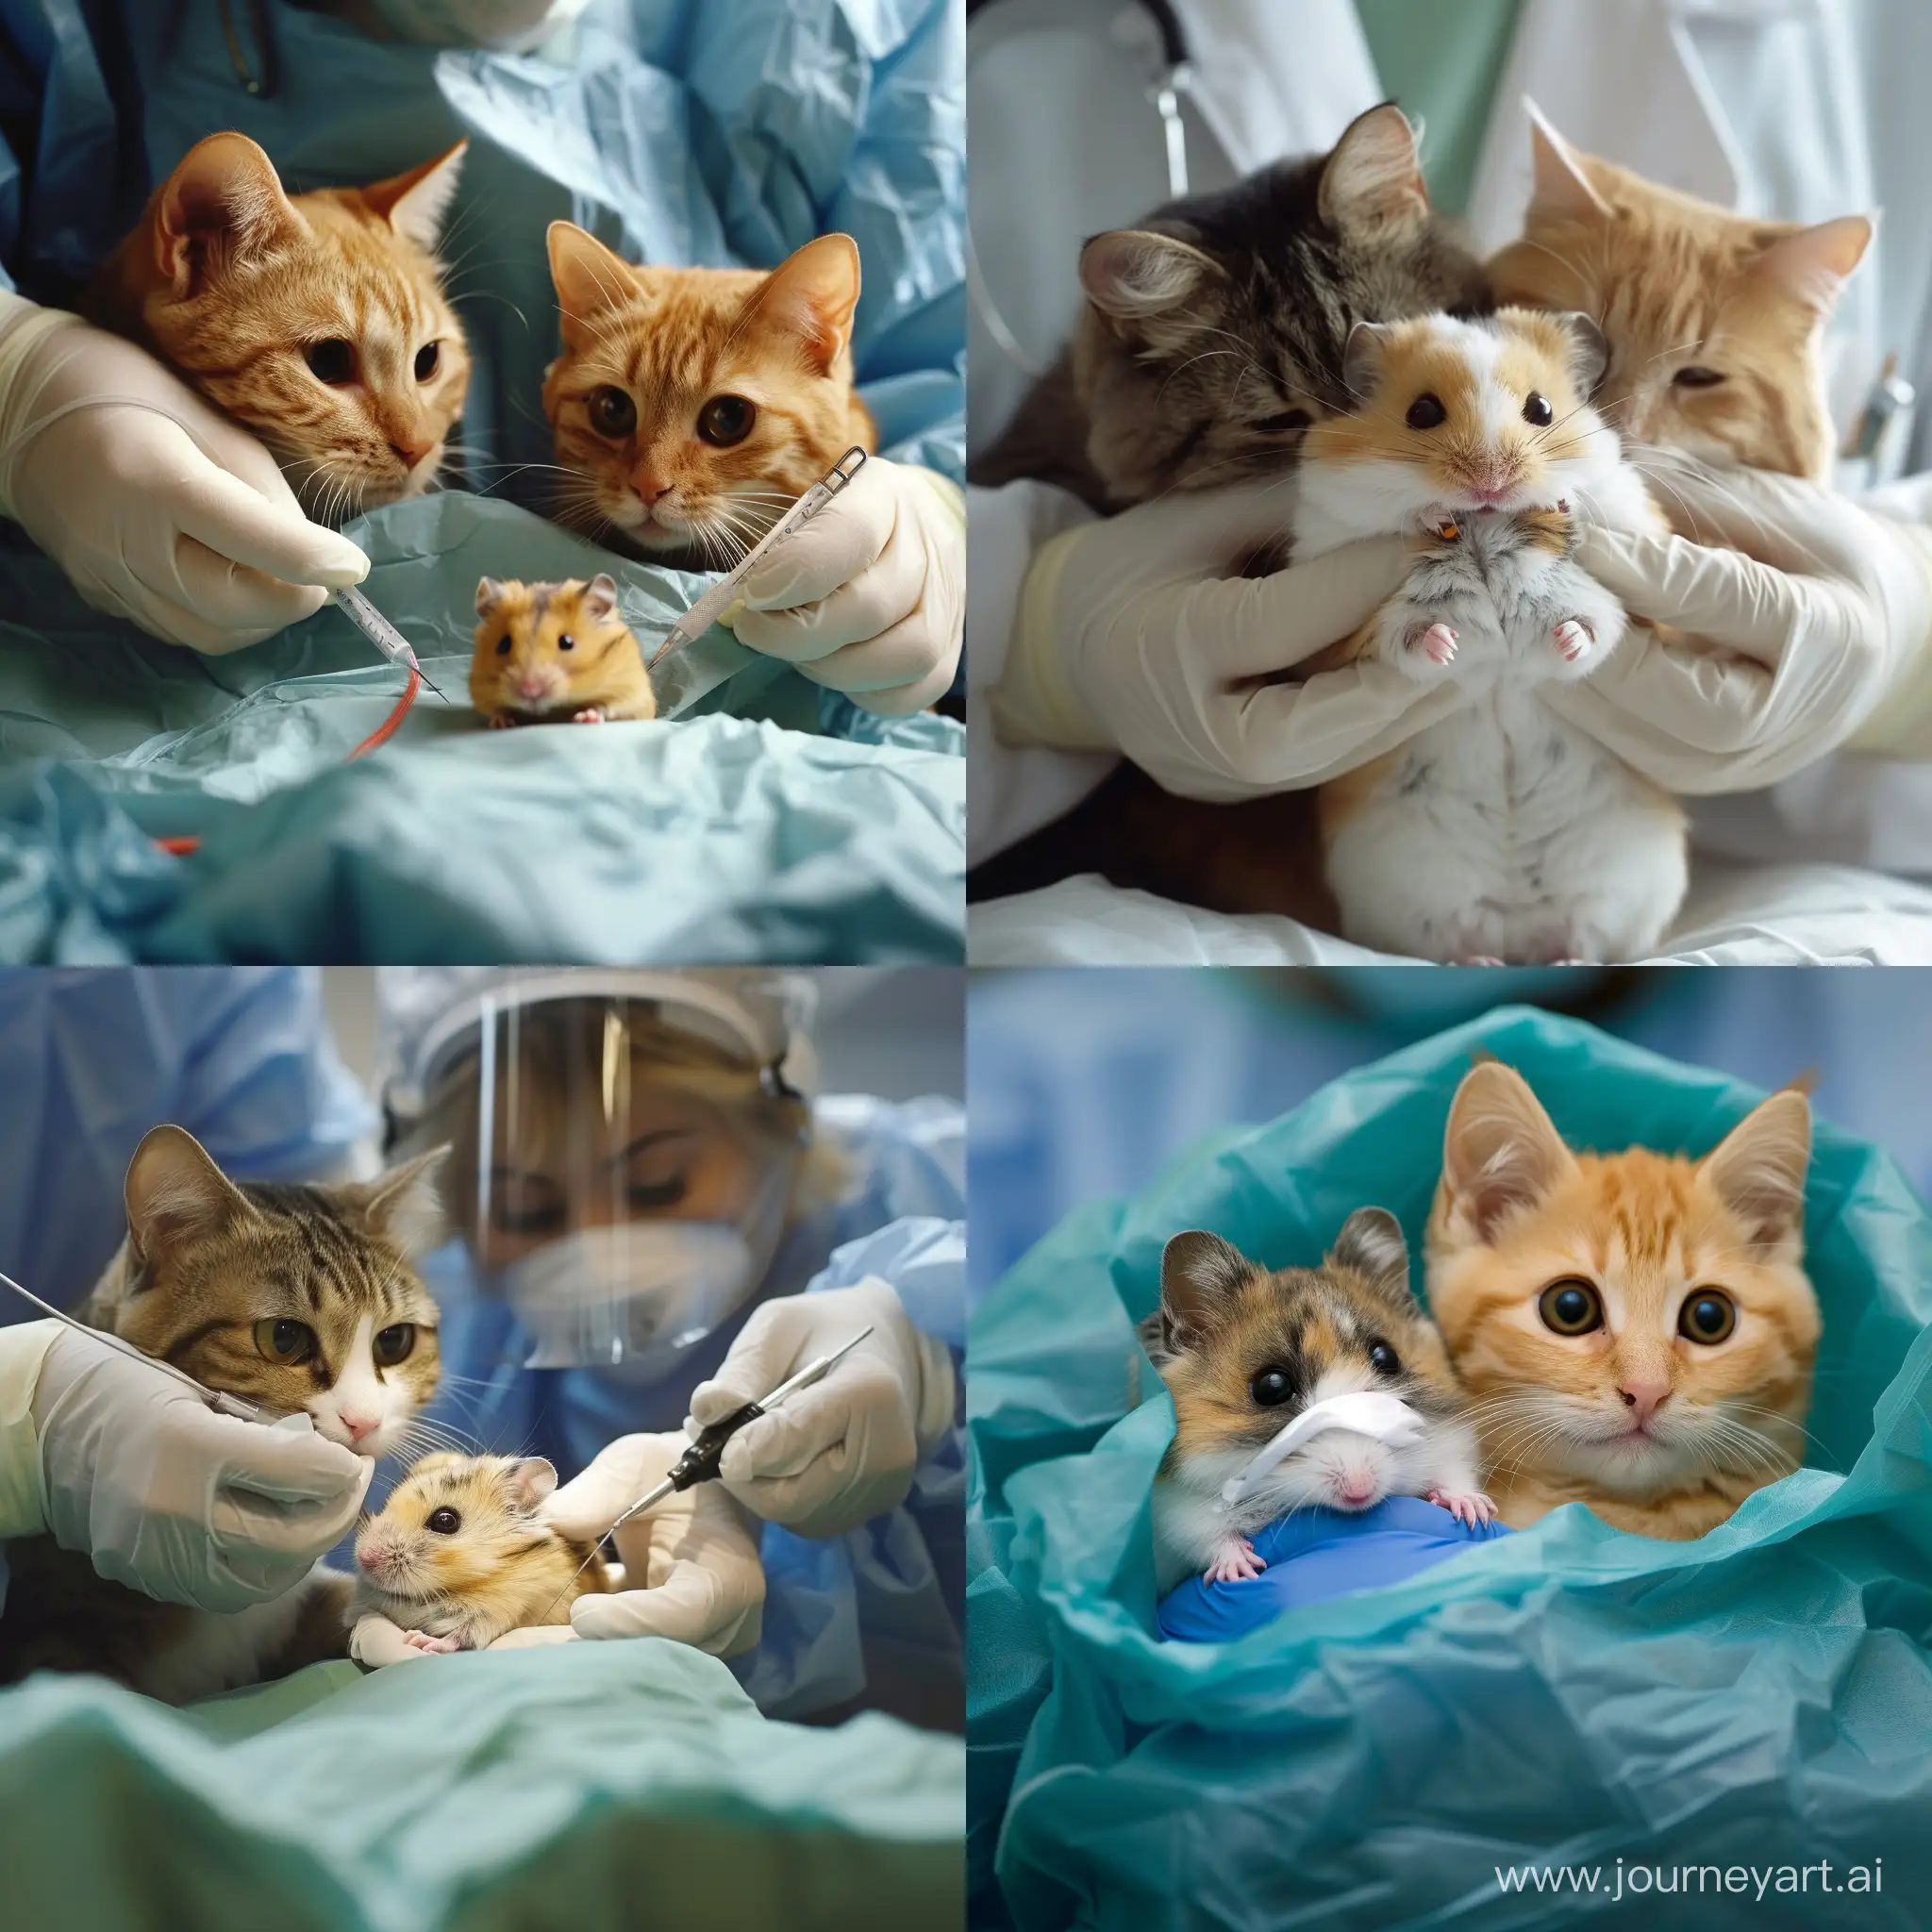 Feline-Surgeons-Performing-Delicate-Operation-on-Hamster-Patient